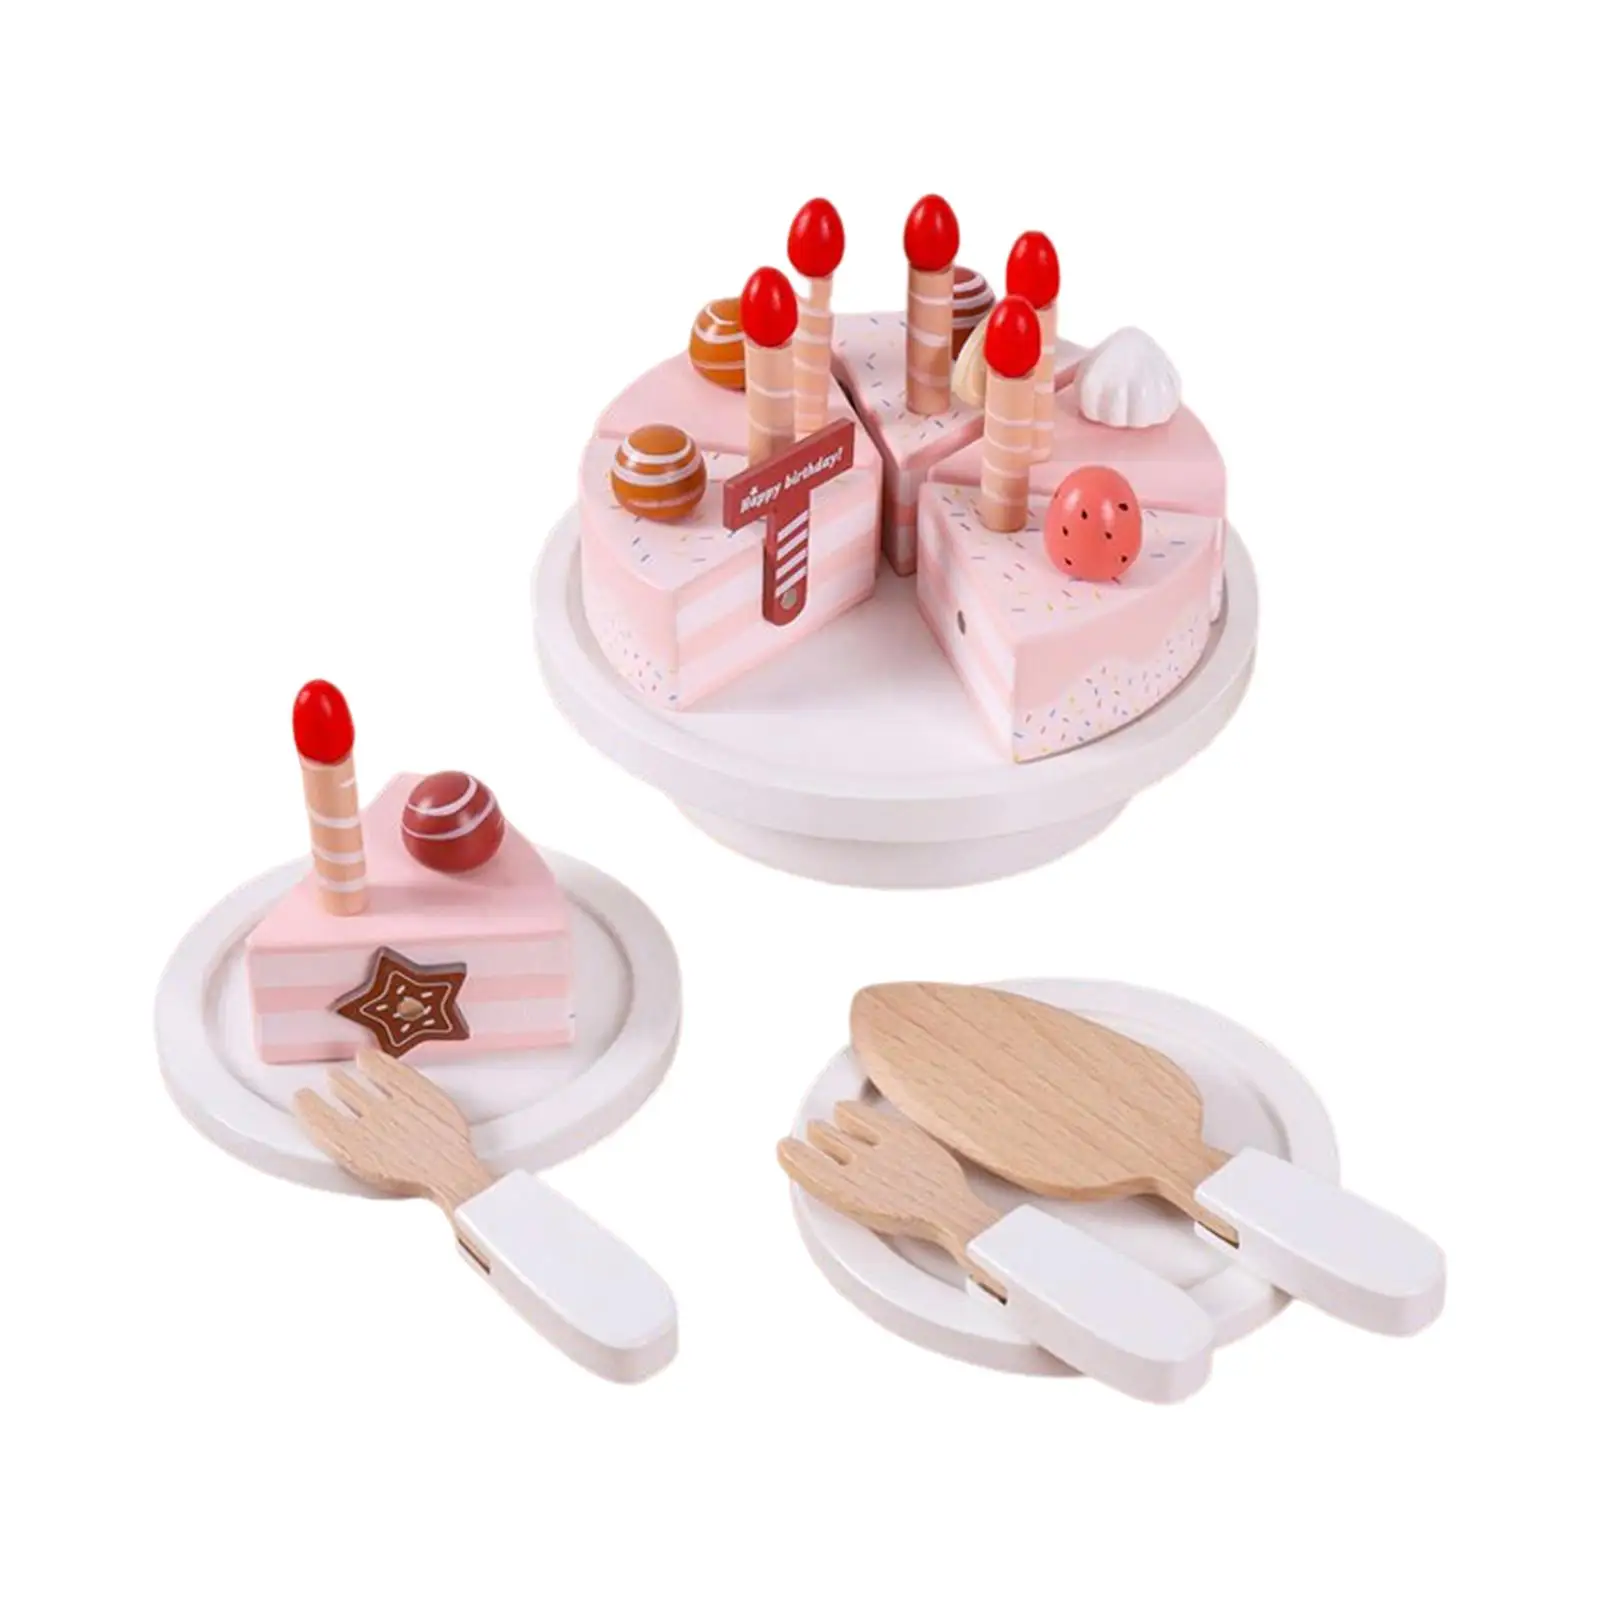 Simulation Wooden Cake Toys Role Play Toys Montessori Toys DIY Pretend Play for Ages 3 Years and up Girls Kids Birthday Gifts